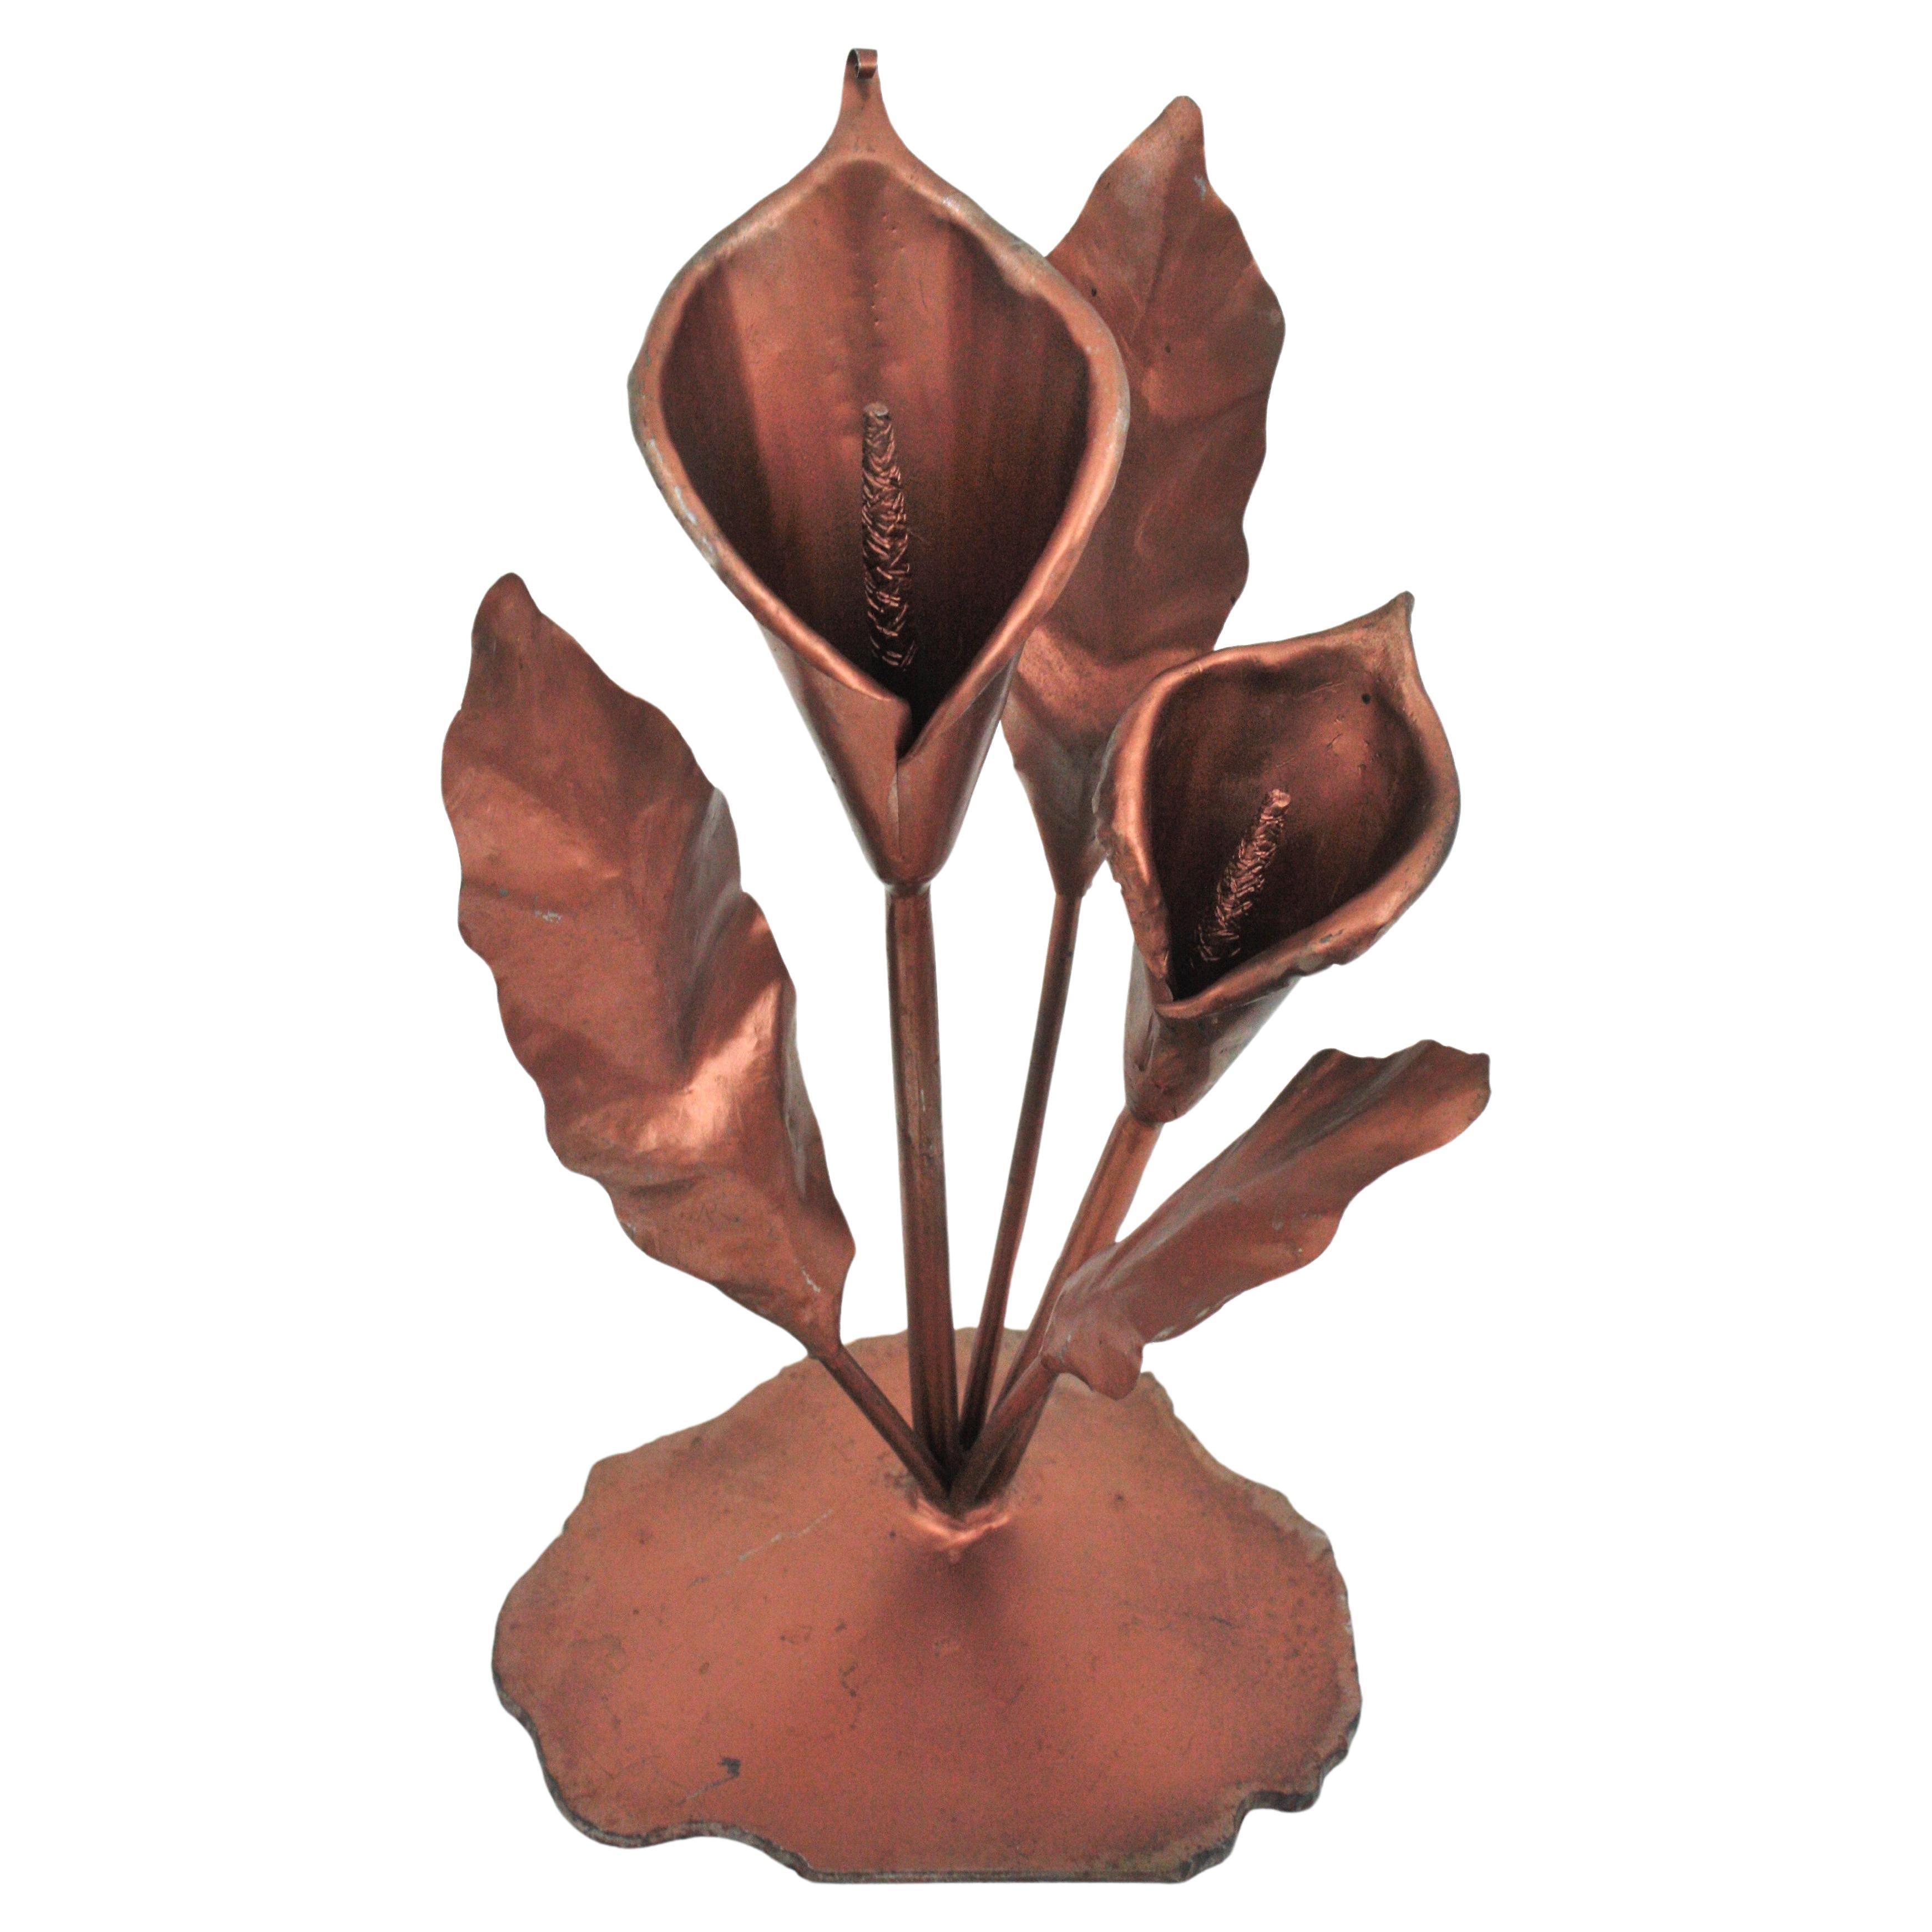 Metal Coppered Flower Sculpture / Paperweight, Spain, 1960s
Two Calla Lily flowers with leaves standing on a base. Metal coppered.
Minor wear according to its age.
To be used as decorative sculpture or paperweight.
Great gift idea.
Overall measures: